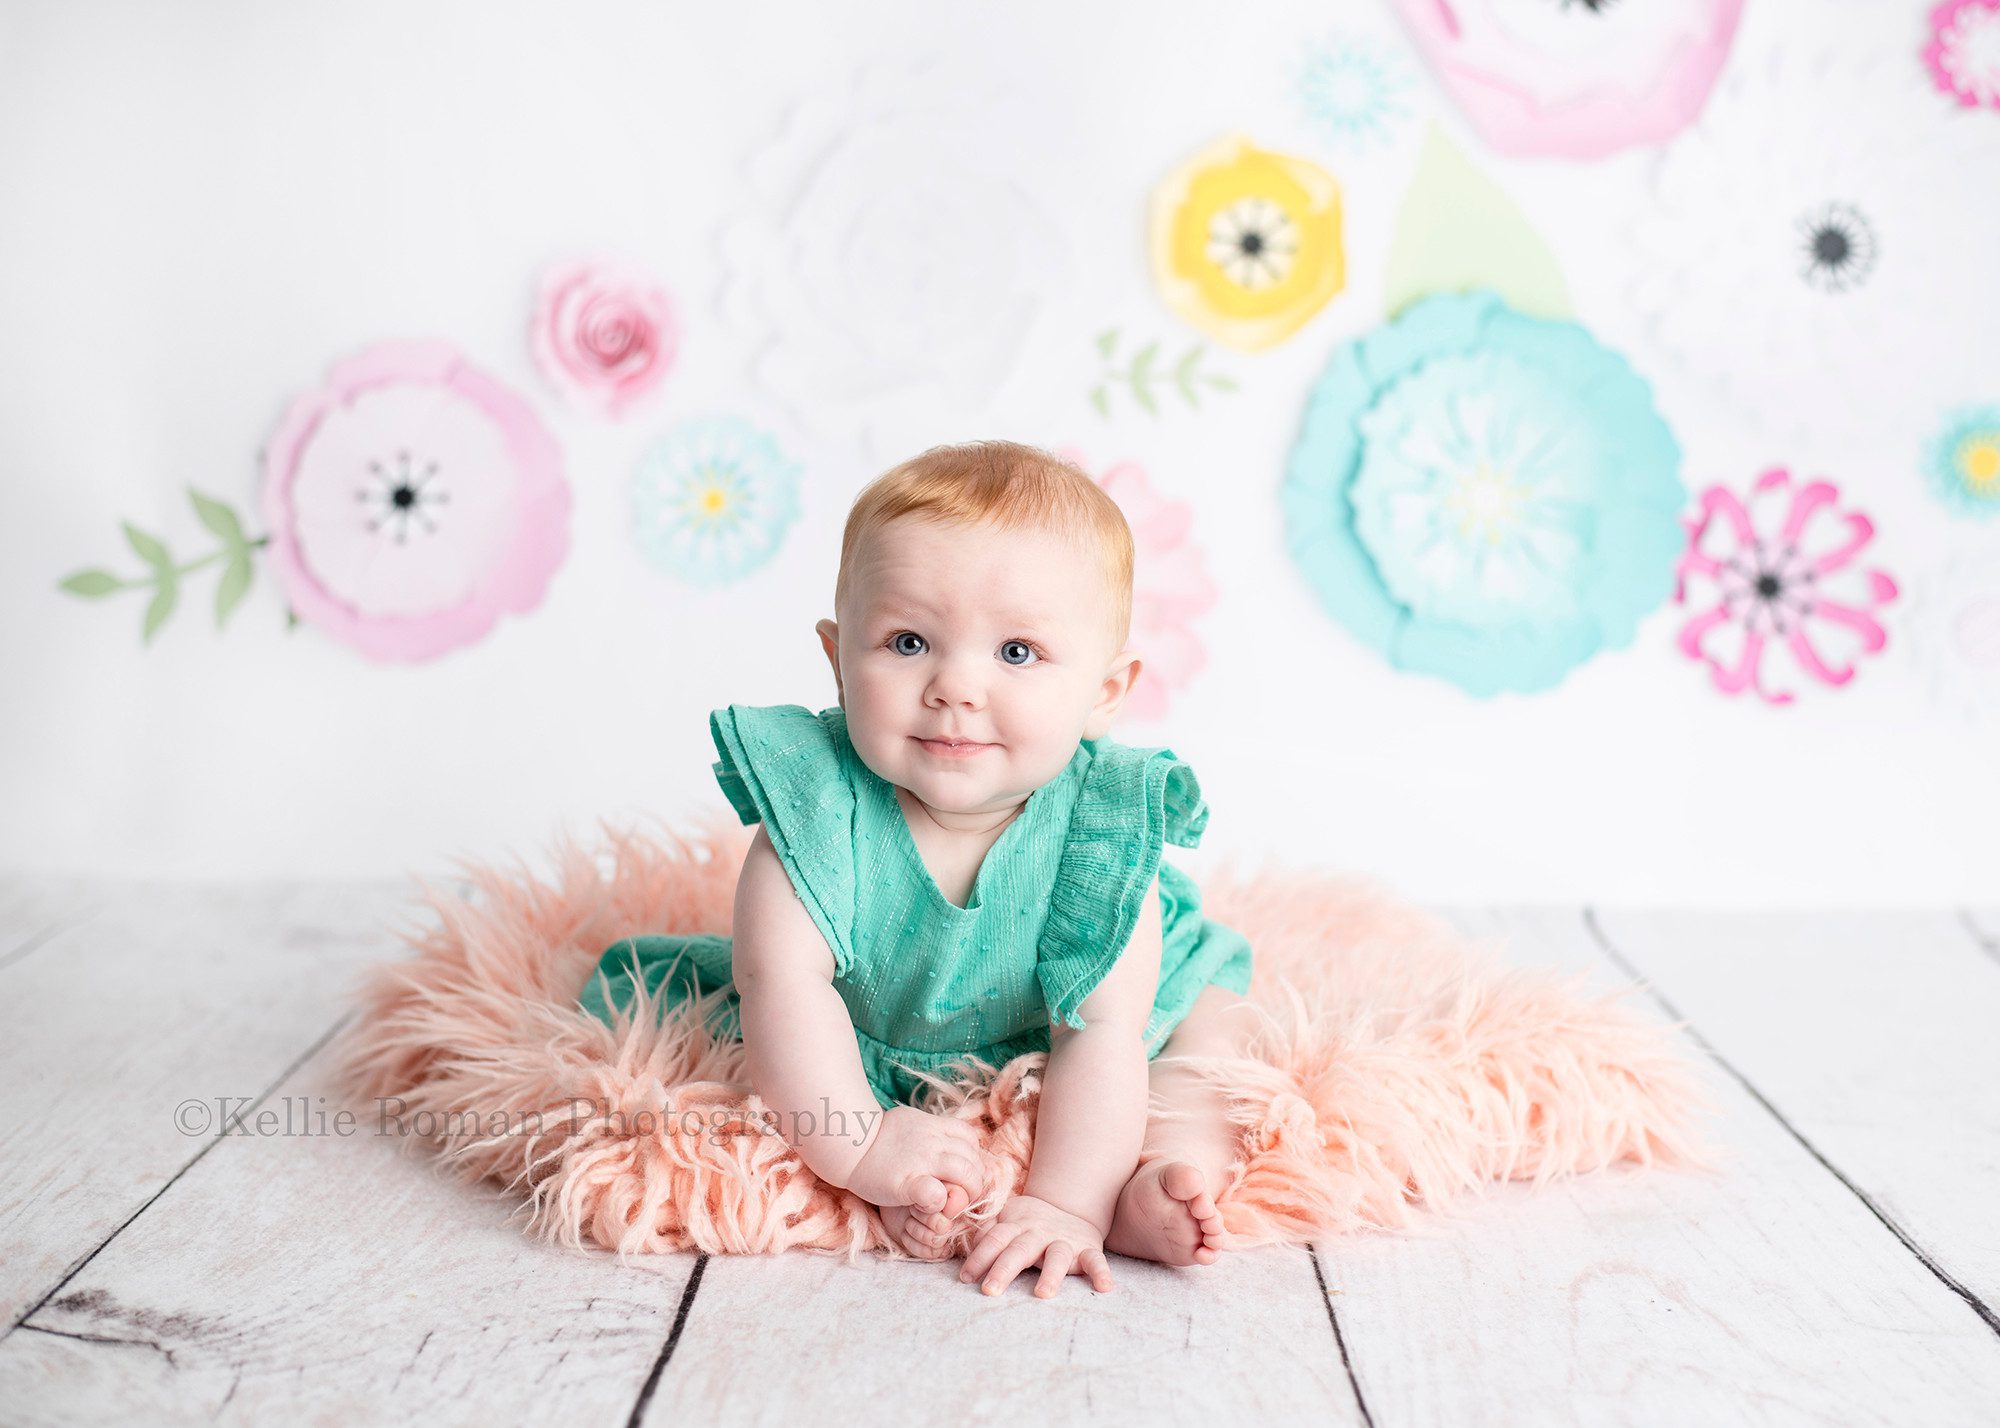 six month session a six month old infant girl is sitting on peach fur with a white backdrop with colored flowers and a white wood floor she has a green dress on and has a sweet innocent expression on her face while looking up with big blue eyes